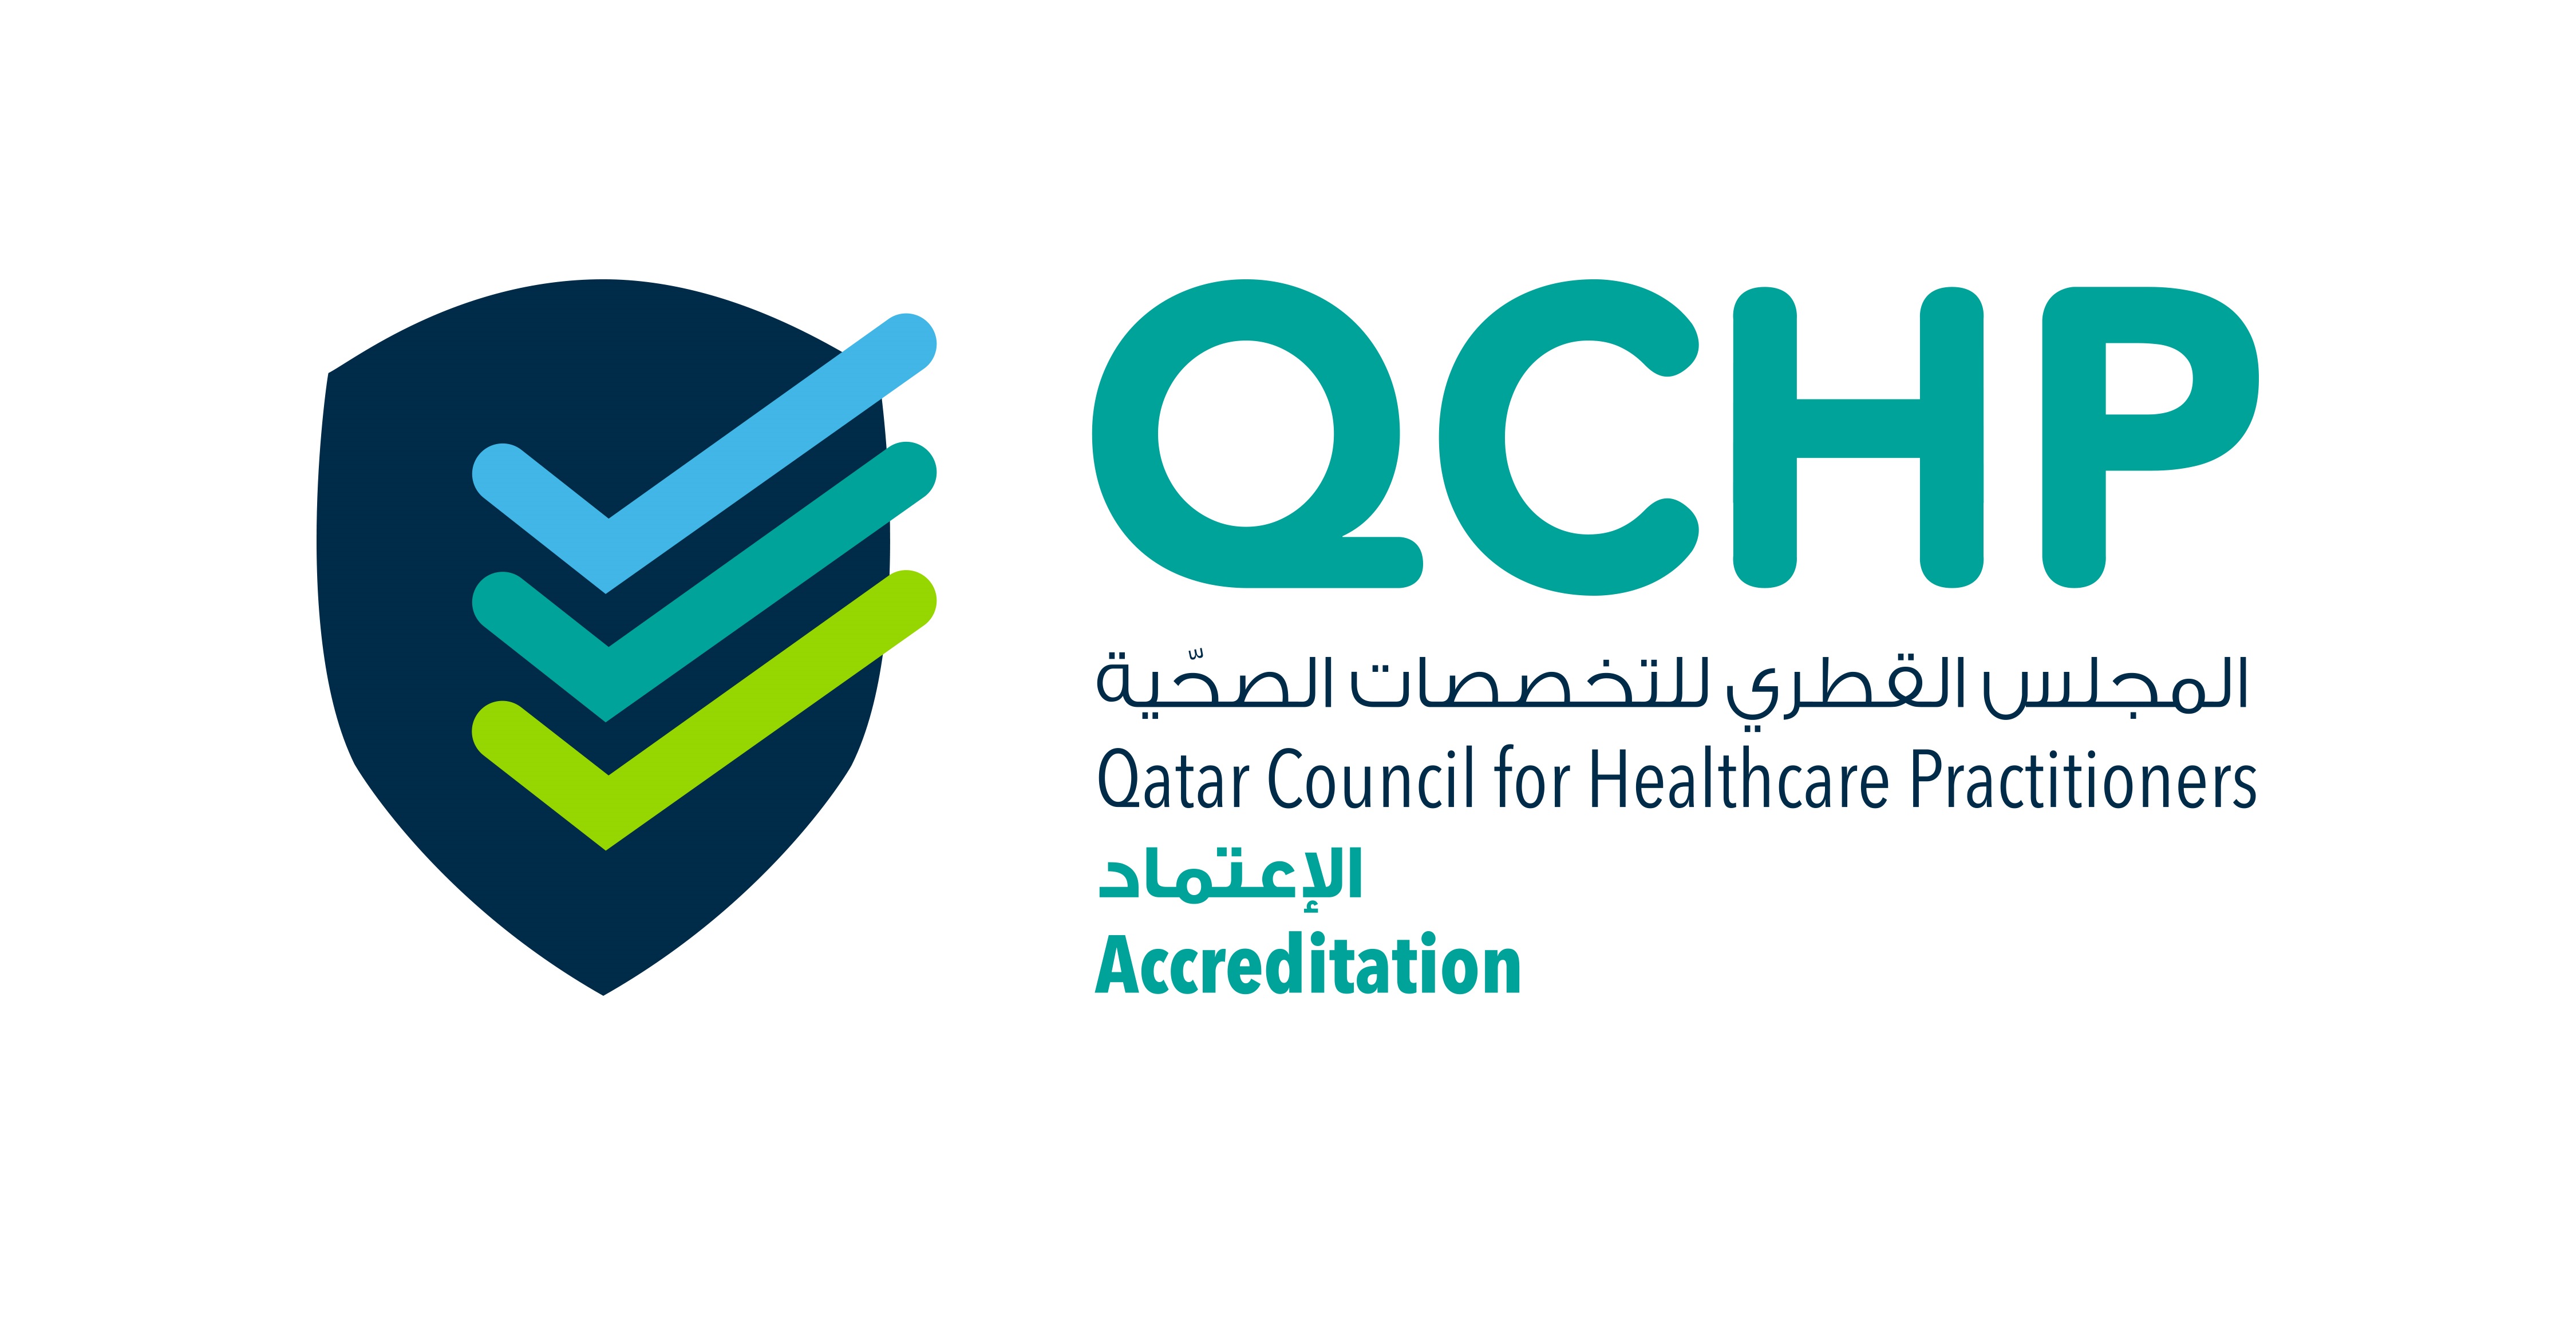 Qatar Council for Healthcare Practitioners (QCHP)